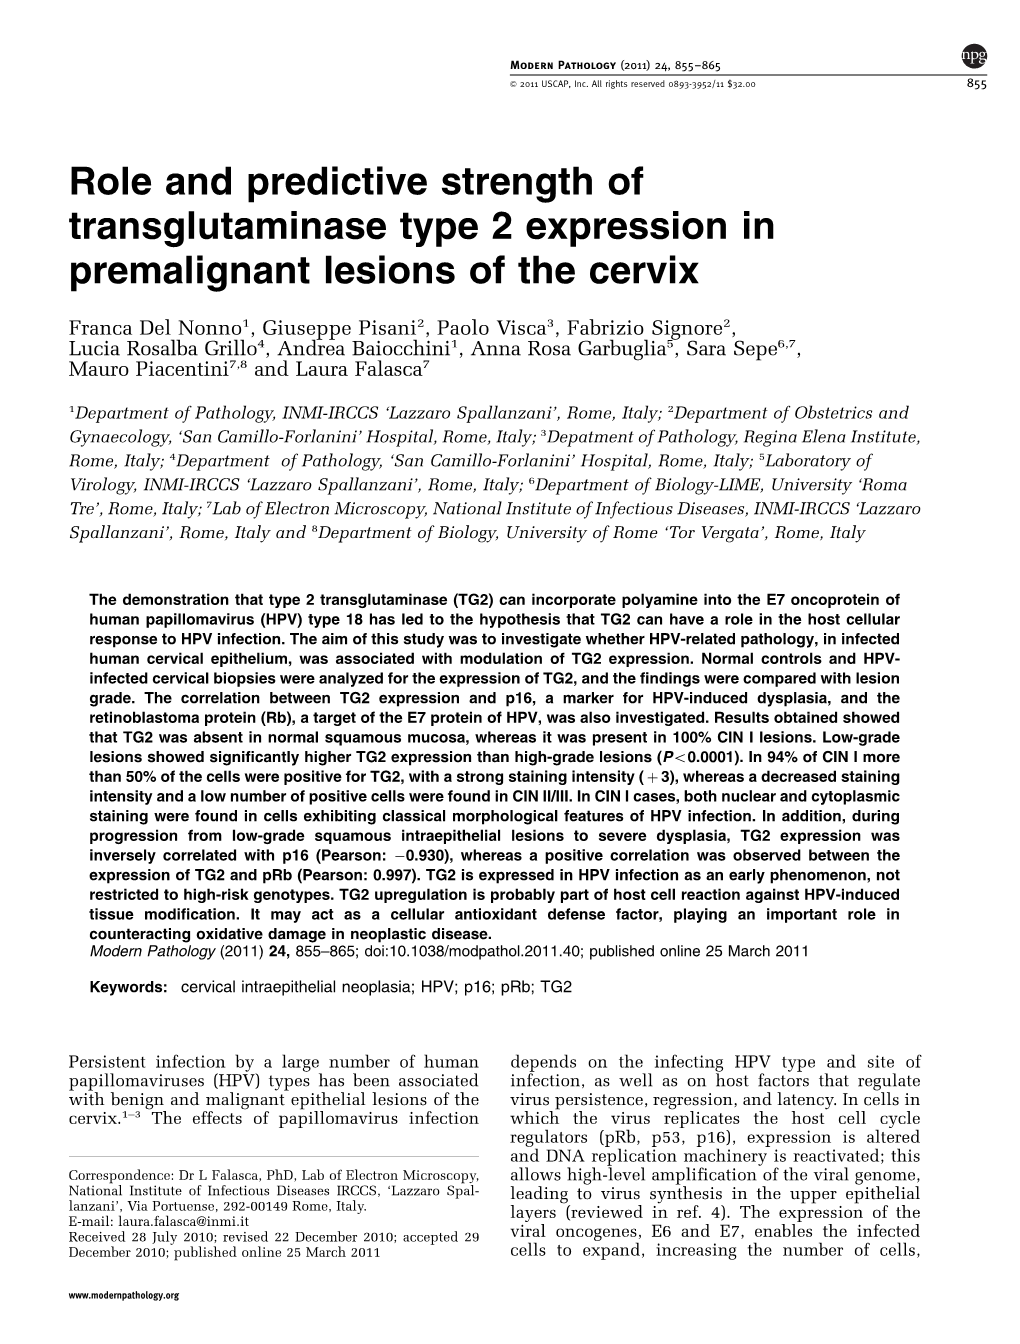 Role and Predictive Strength of Transglutaminase Type 2 Expression in Premalignant Lesions of the Cervix